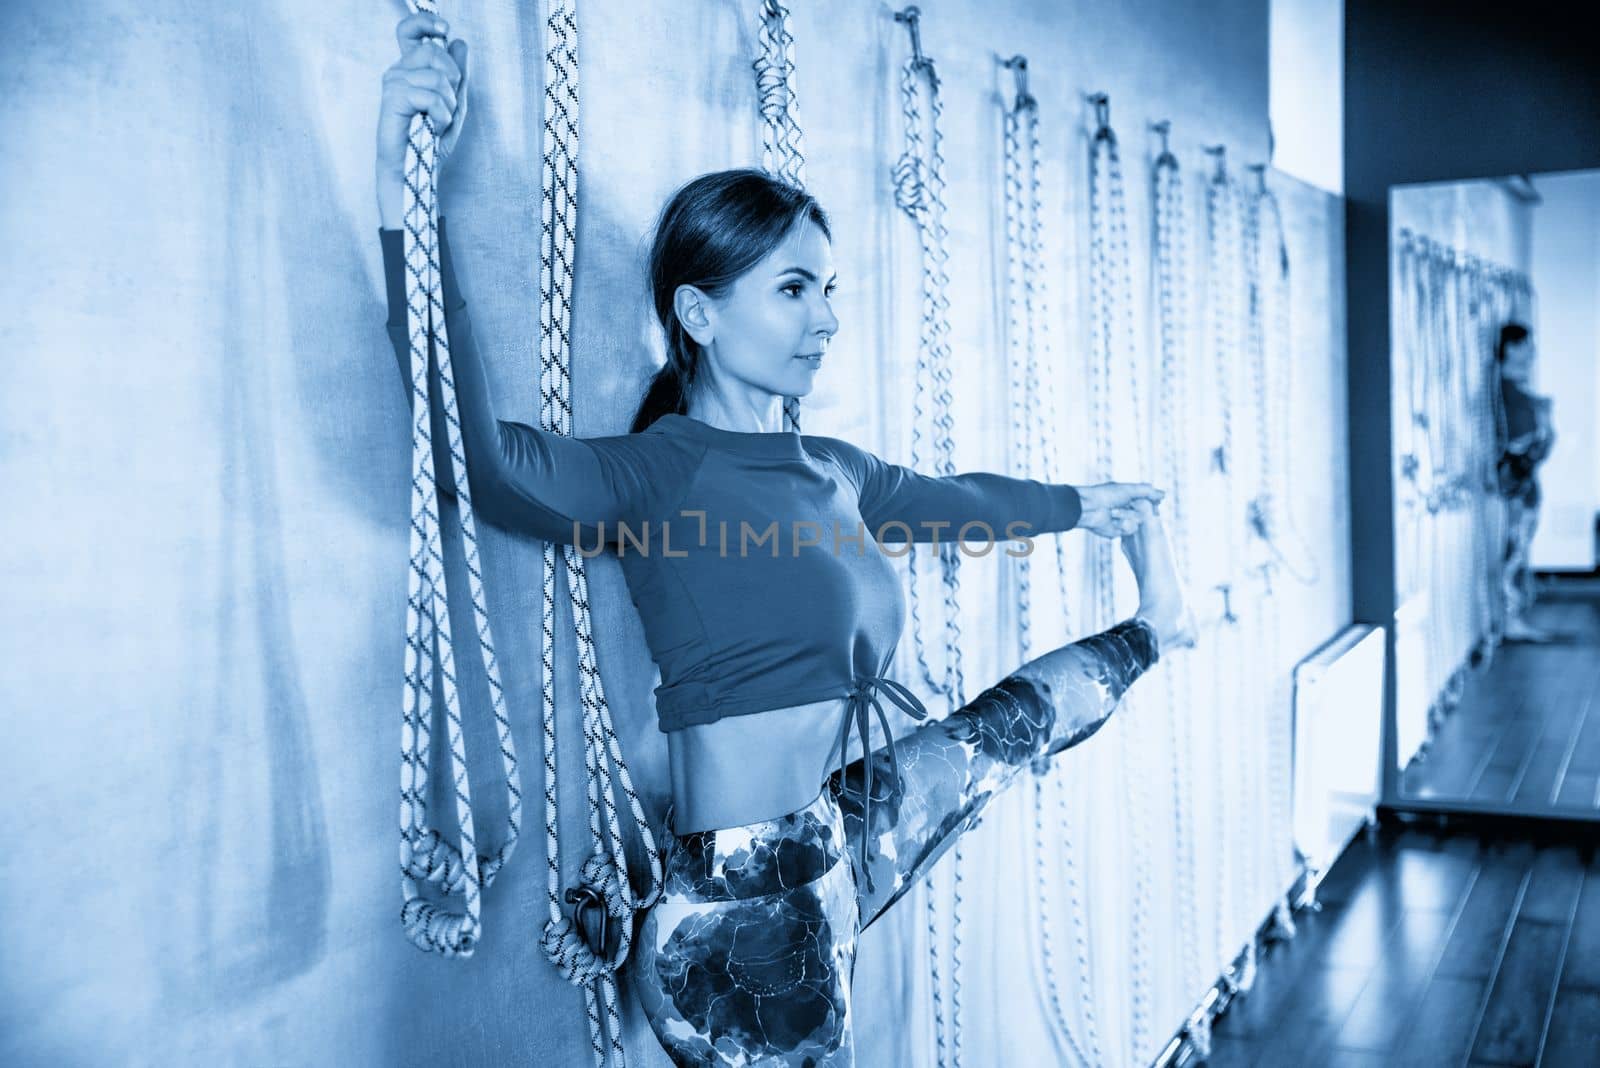 Young girl doing yoga pose with rope against a wall